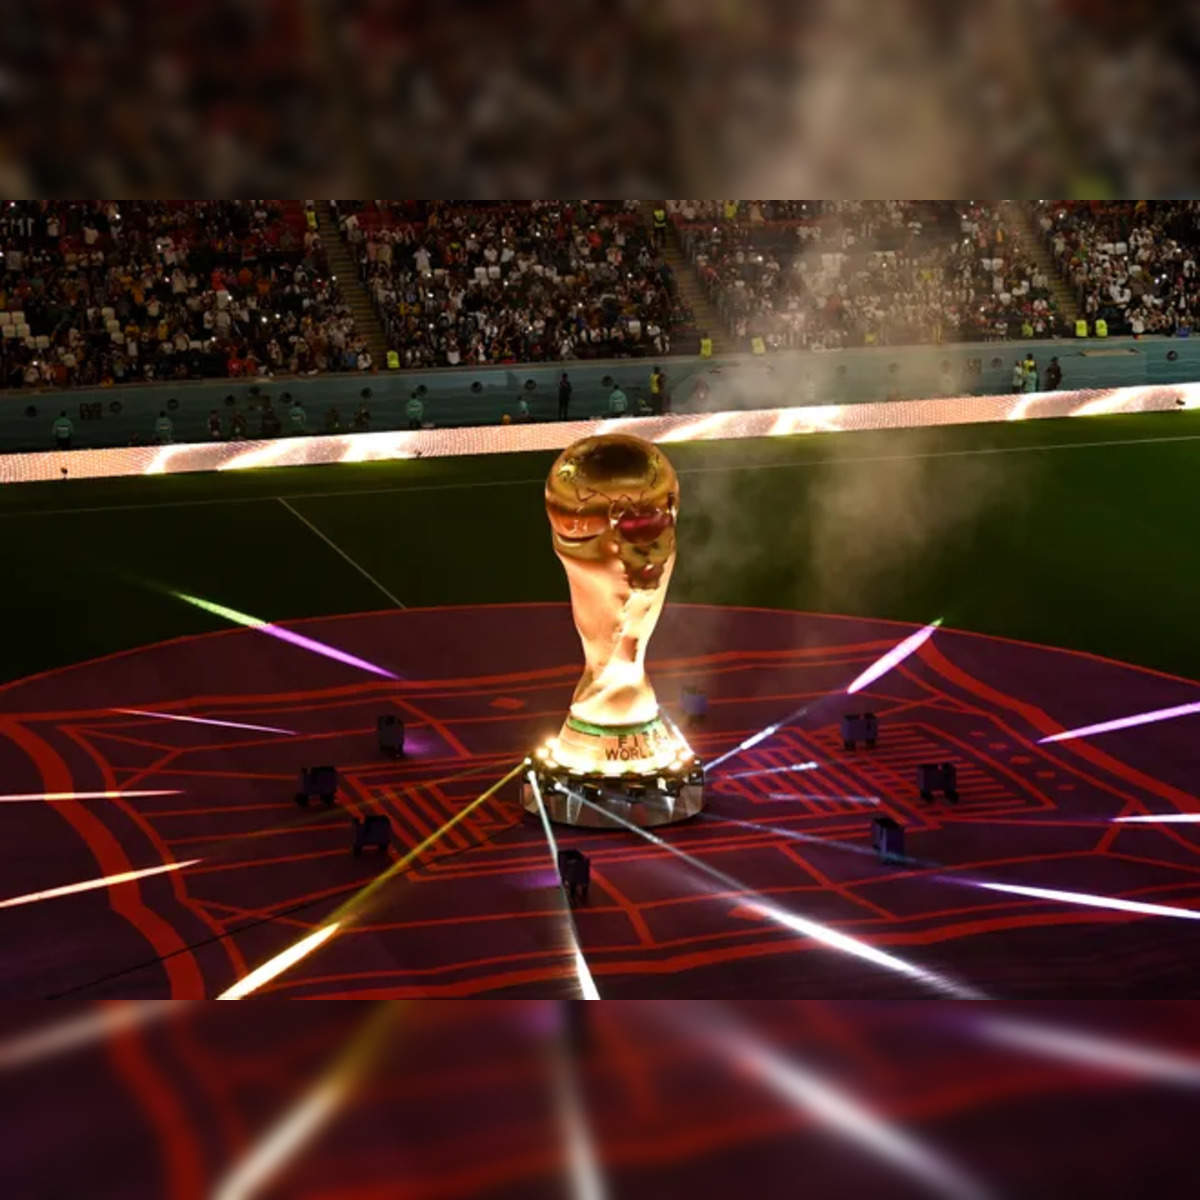 World Cup 2022: FIFA World Cup 2022 schedule: Dates and times in